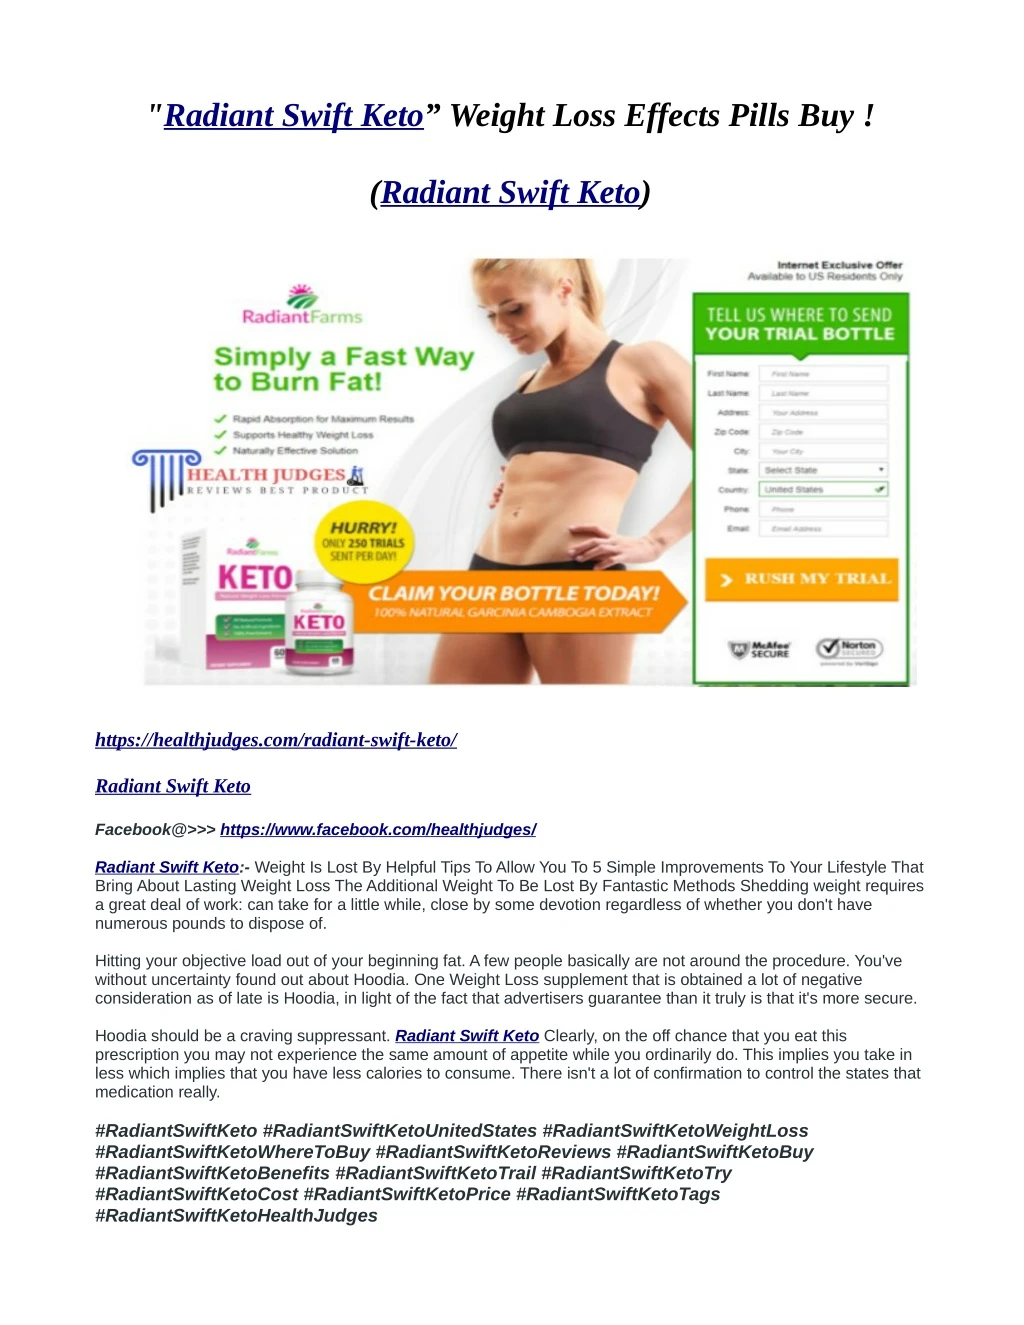 radiant swift keto weight loss effects pills buy